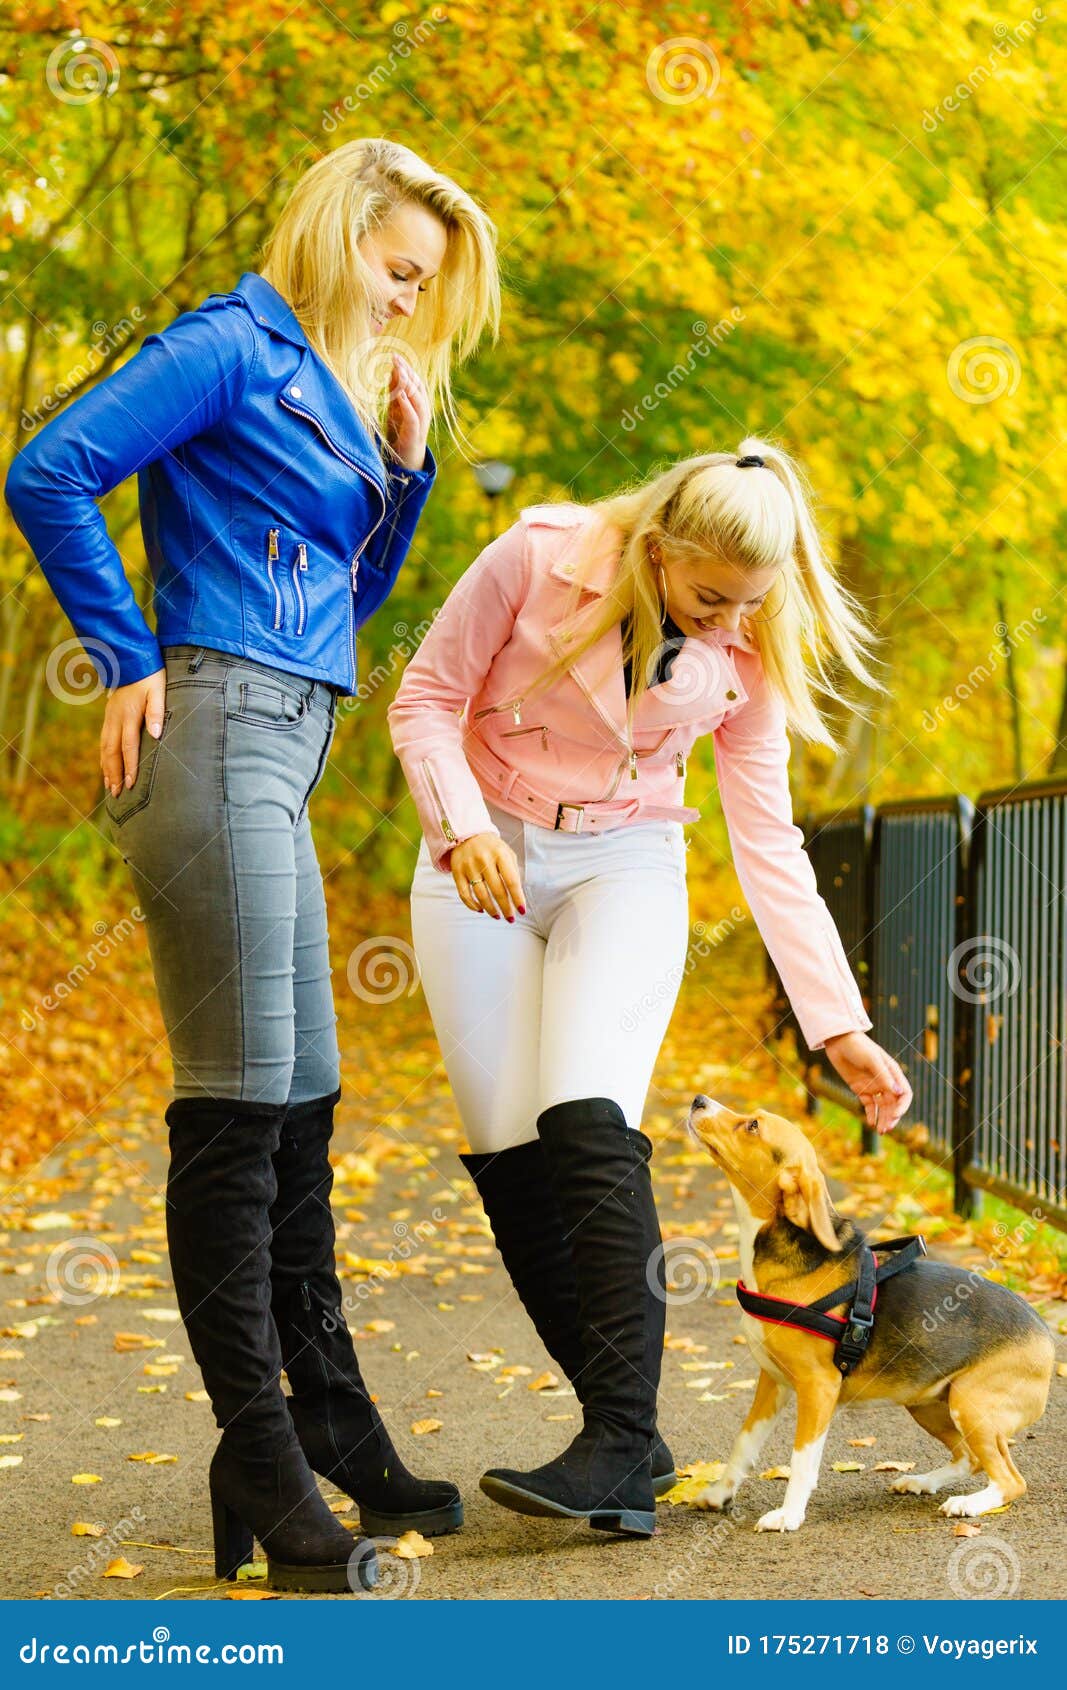 https://thumbs.dreamstime.com/z/females-wearing-fashionable-autumn-outfits-two-friends-women-wearing-fashionable-outfit-walk-dog-female-having-navy-175271718.jpg